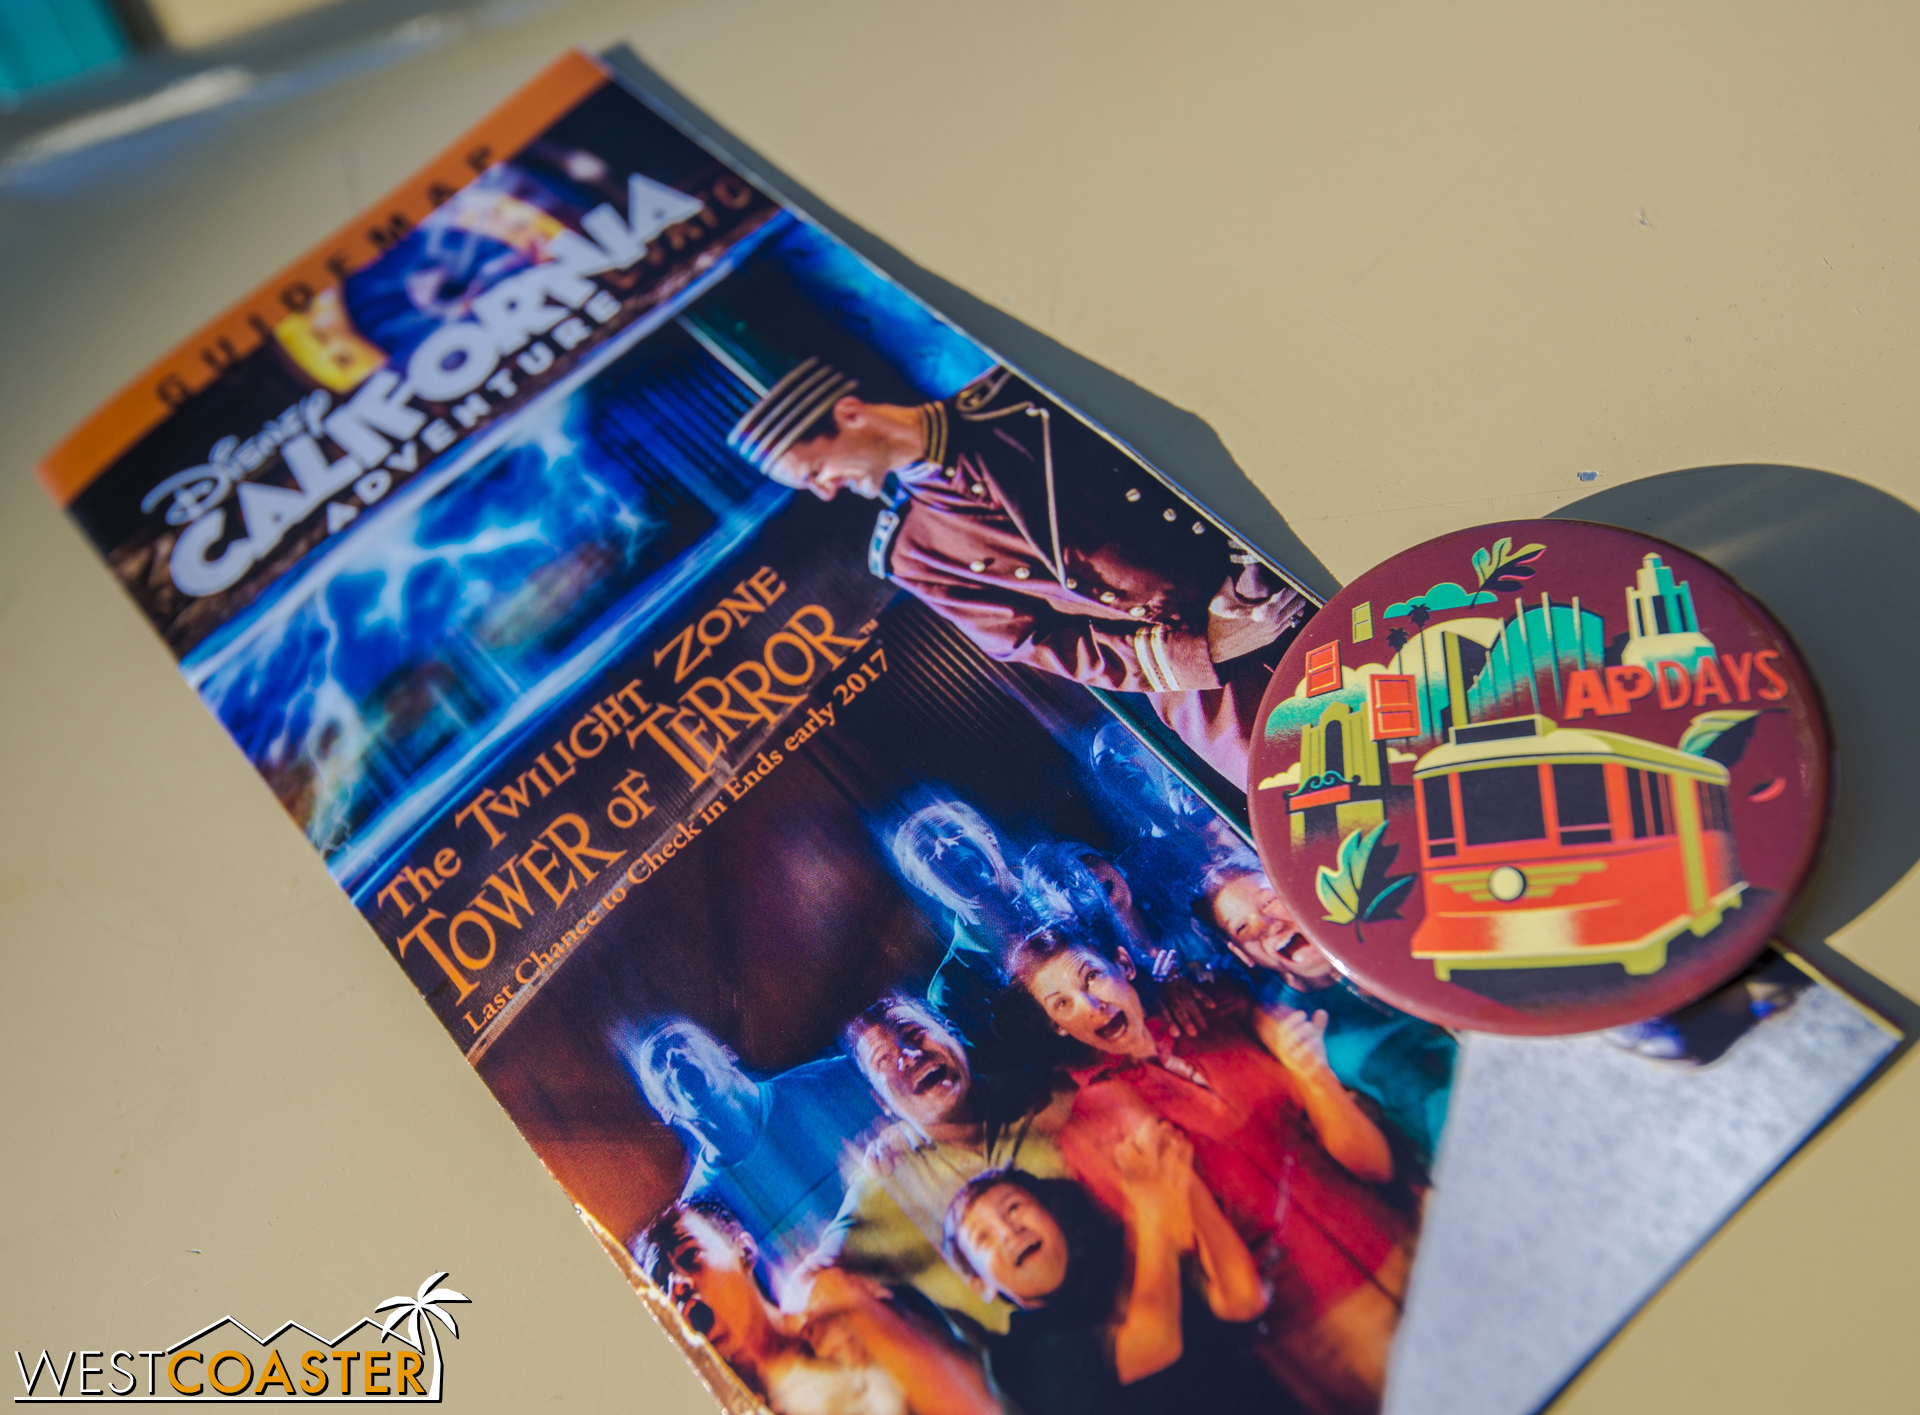  Also, the new DCA map features Tower of Terror (and actually a pretty cool photo). 